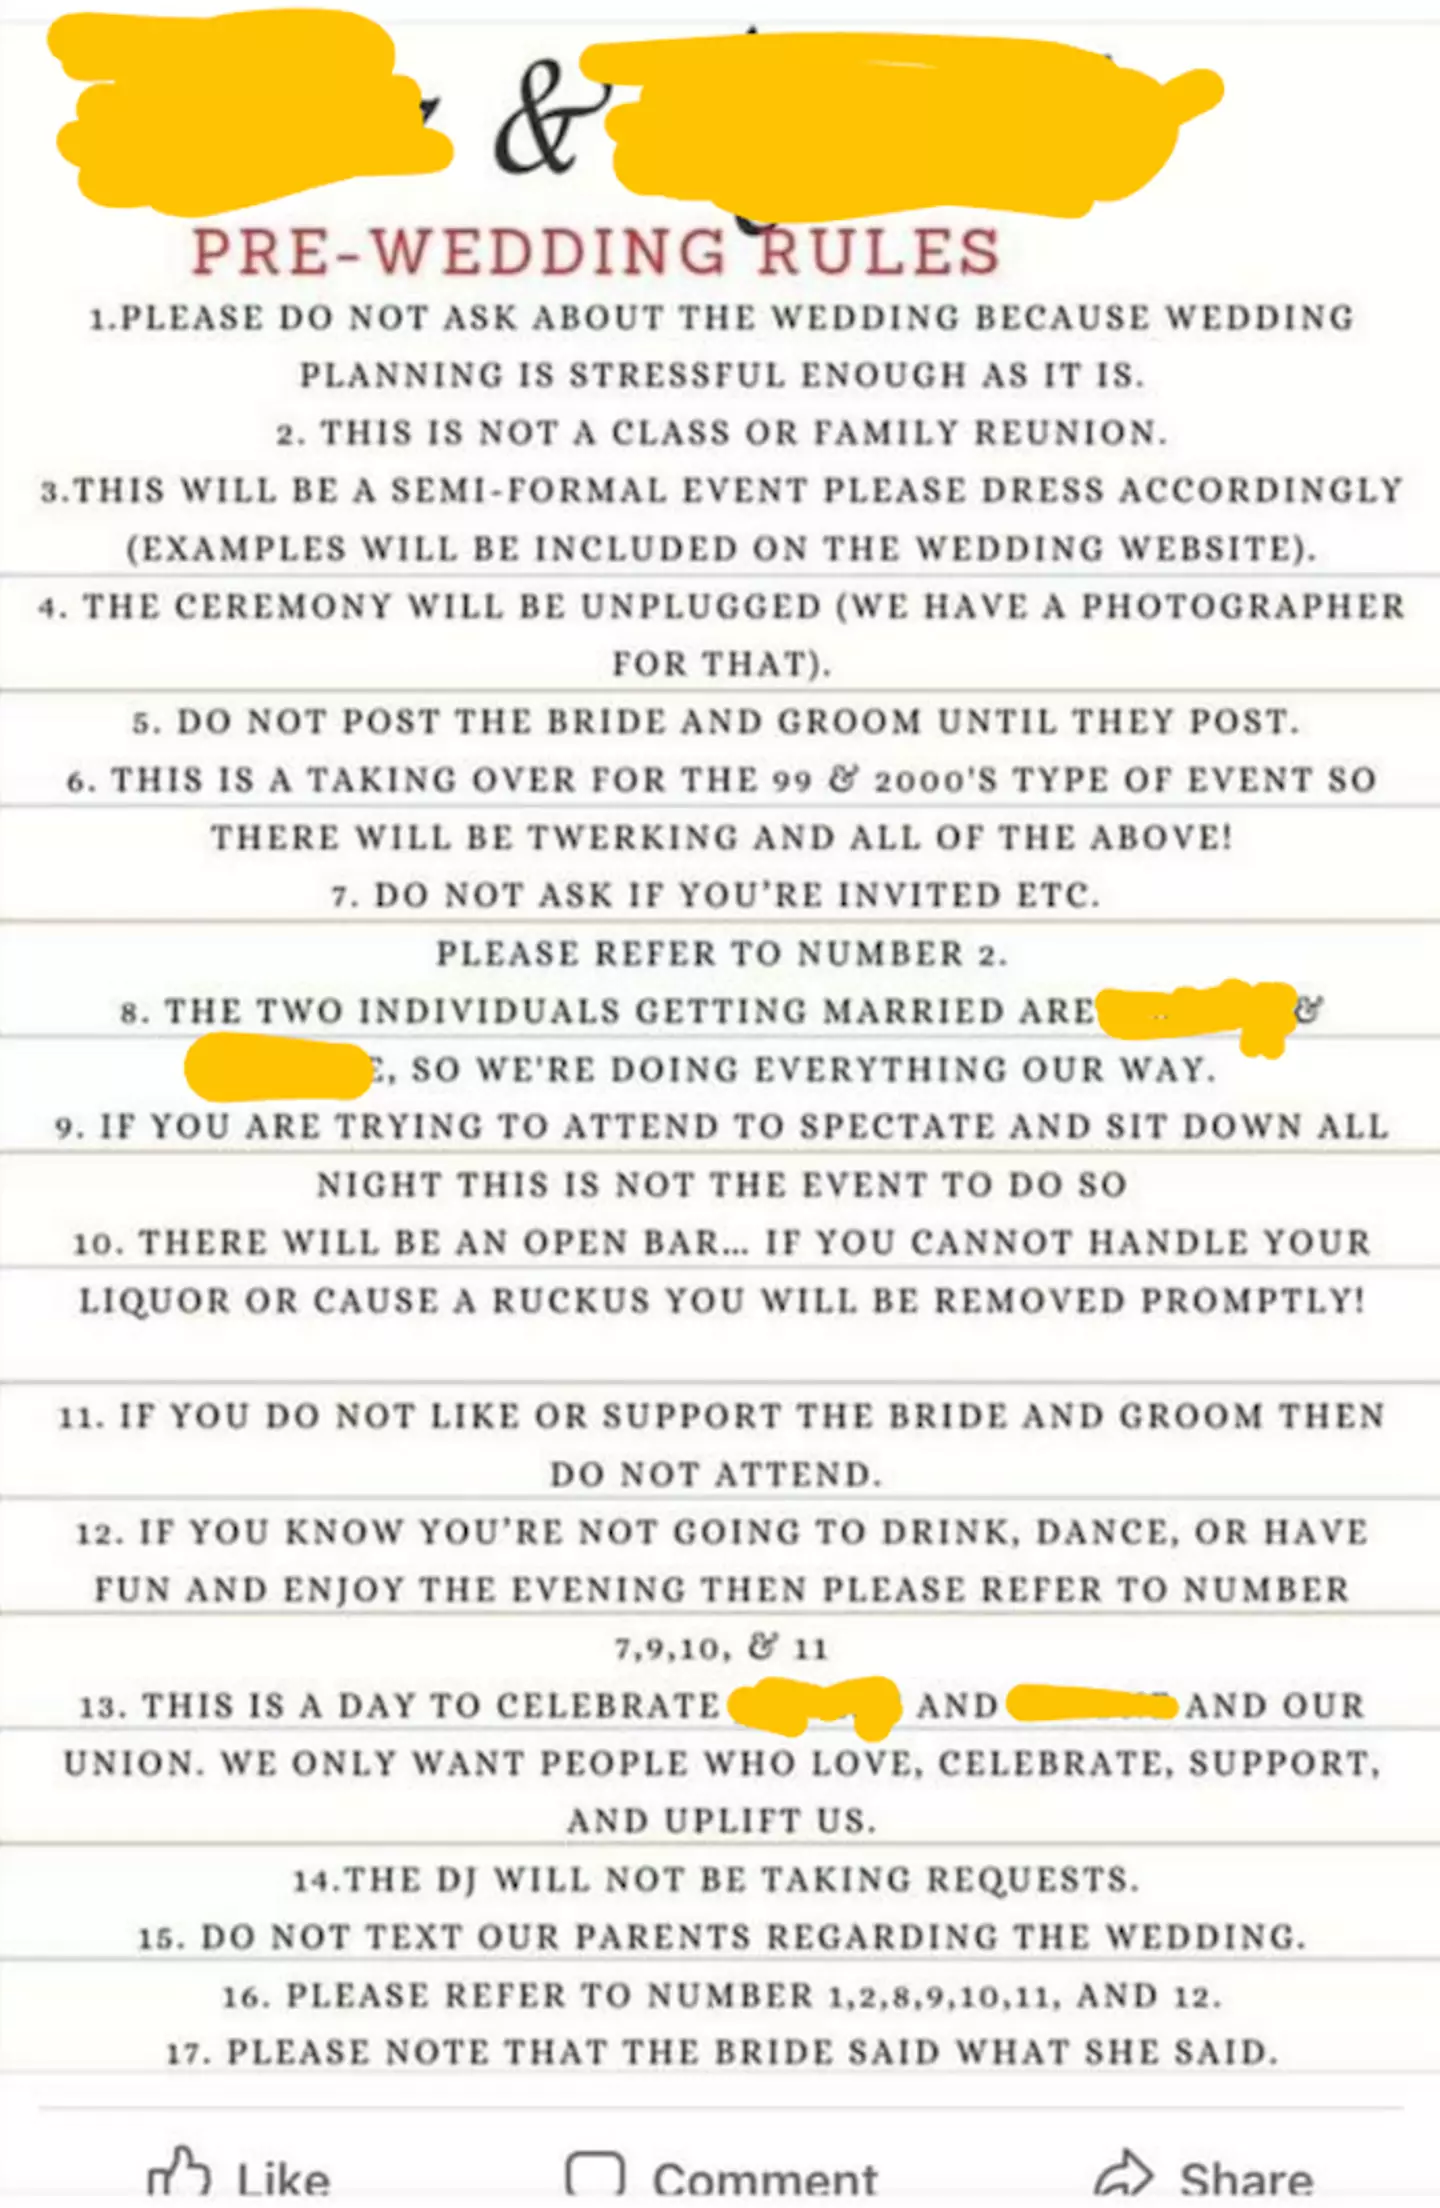 The wedding rules were originally posted on Facebook (